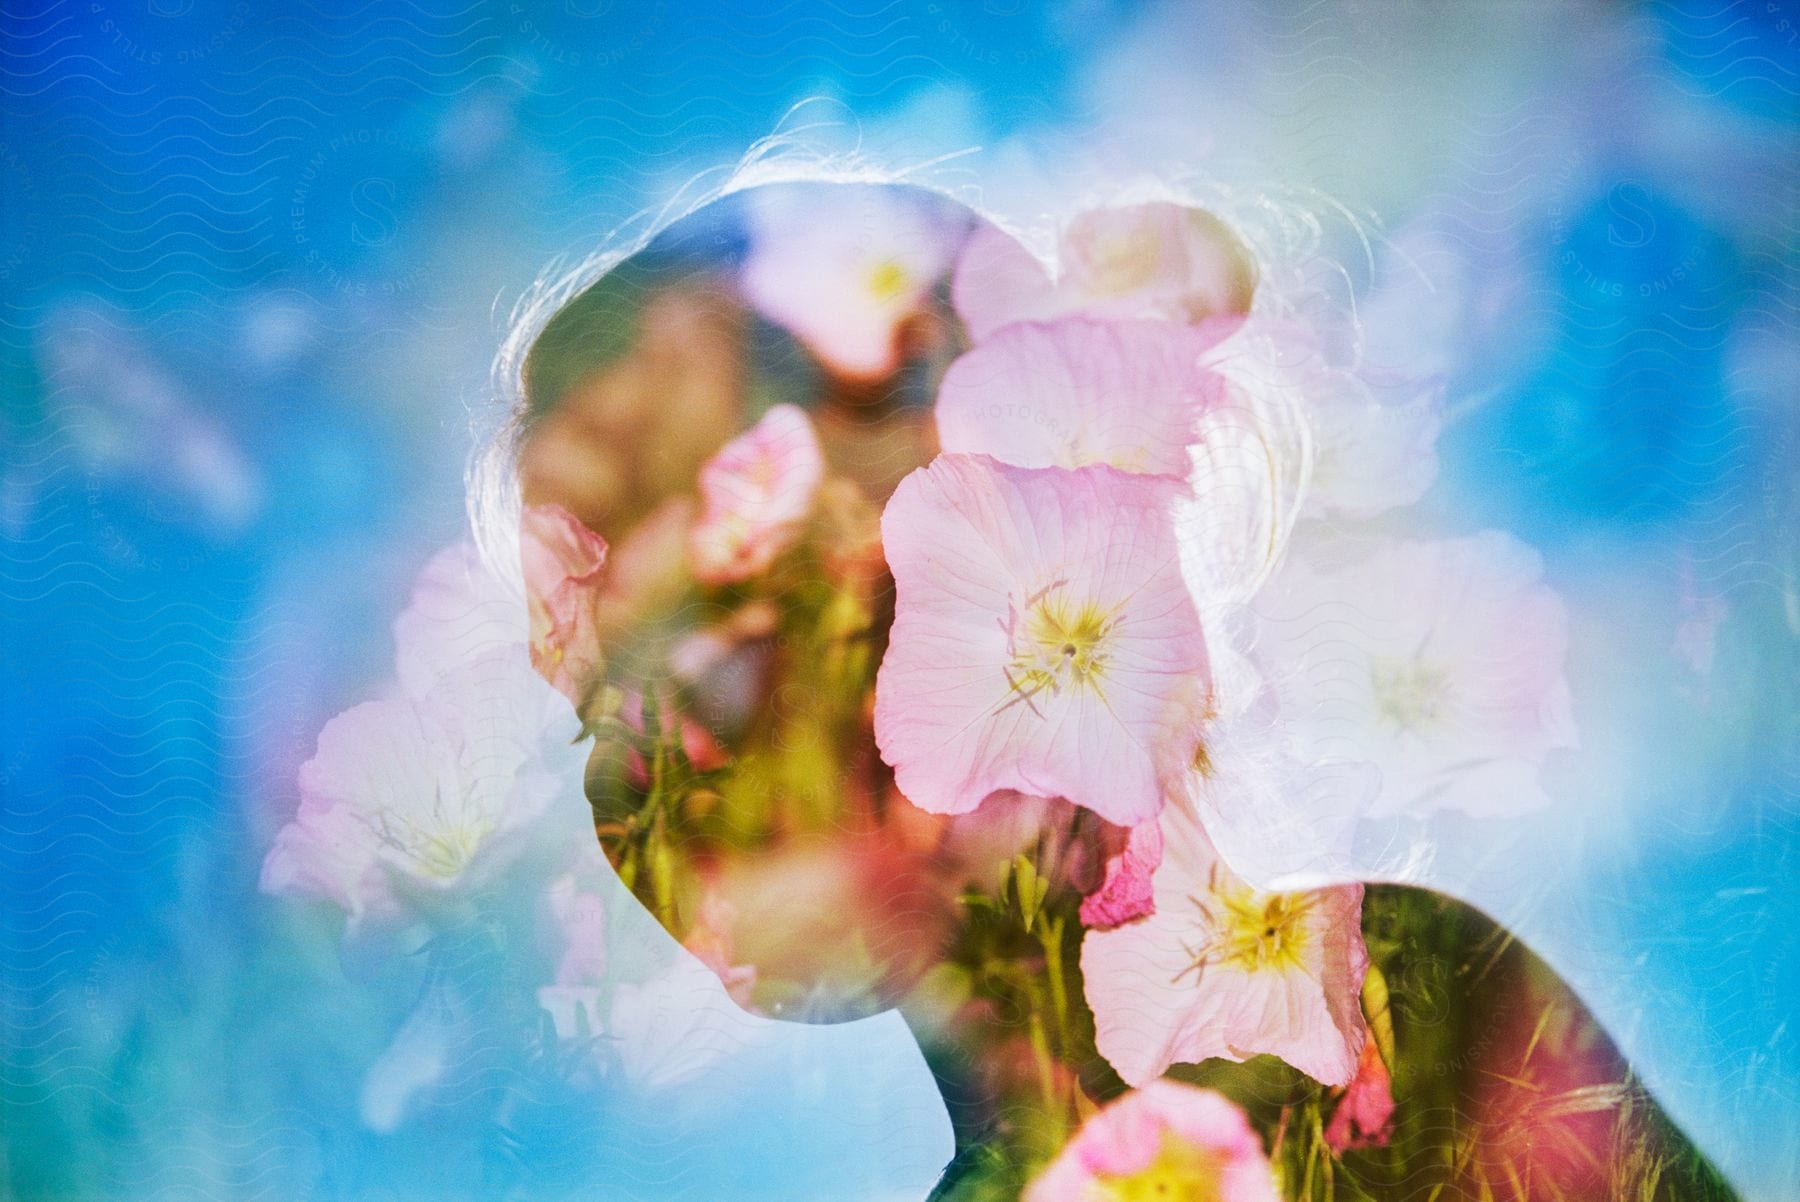 Stock photo of multi layered exposure of a females face covered in flower petals on a bright sunny day.